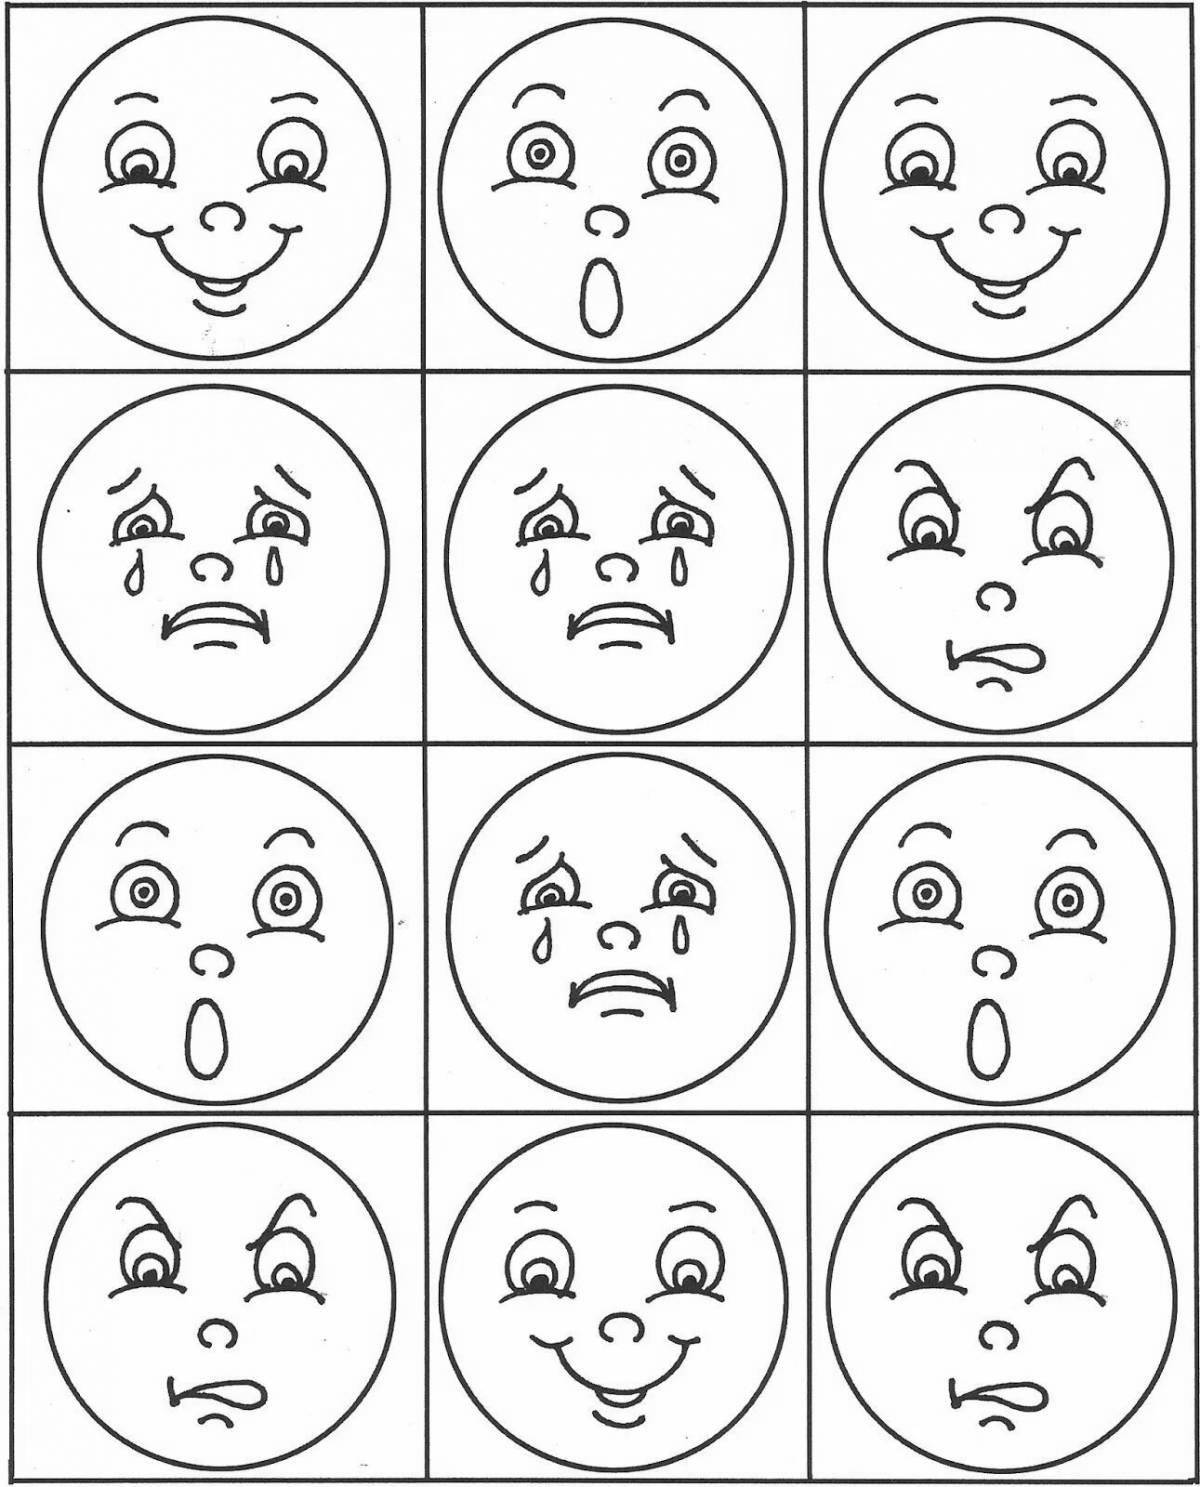 Fun coloring pages of emotions for children